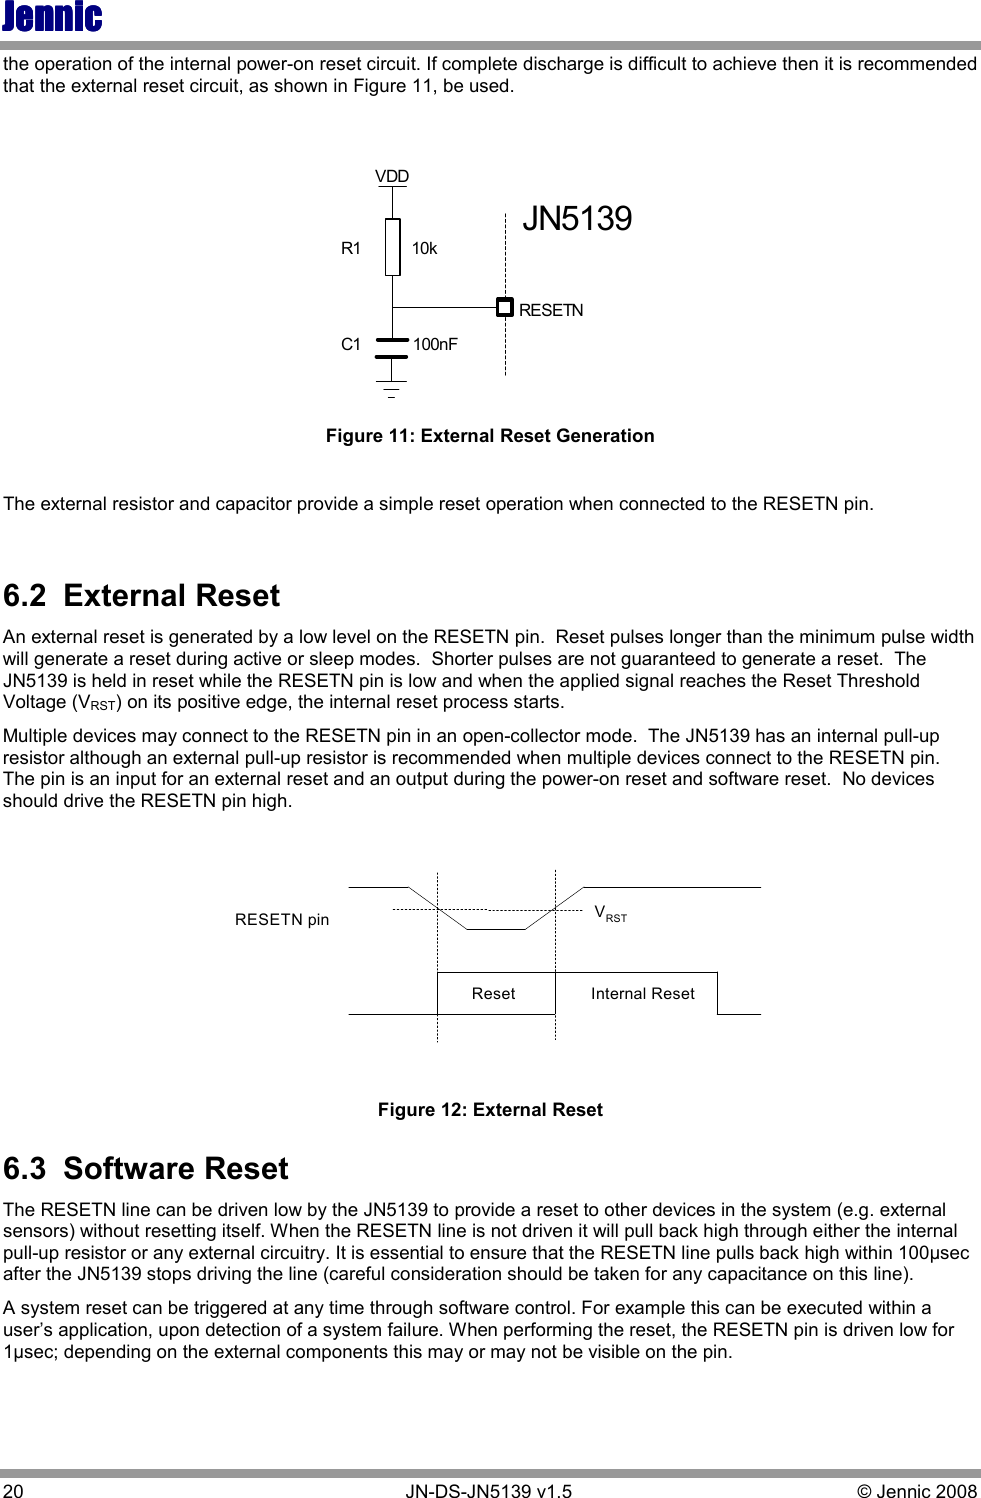 JennicJennicJennicJennic 20        JN-DS-JN5139 v1.5  © Jennic 2008  the operation of the internal power-on reset circuit. If complete discharge is difficult to achieve then it is recommended that the external reset circuit, as shown in Figure 11, be used. RESETNC1R1JN5139VDD10k100nF Figure 11: External Reset Generation  The external resistor and capacitor provide a simple reset operation when connected to the RESETN pin.  6.2  External Reset An external reset is generated by a low level on the RESETN pin.  Reset pulses longer than the minimum pulse width will generate a reset during active or sleep modes.  Shorter pulses are not guaranteed to generate a reset.  The JN5139 is held in reset while the RESETN pin is low and when the applied signal reaches the Reset Threshold Voltage (VRST) on its positive edge, the internal reset process starts. Multiple devices may connect to the RESETN pin in an open-collector mode.  The JN5139 has an internal pull-up resistor although an external pull-up resistor is recommended when multiple devices connect to the RESETN pin.  The pin is an input for an external reset and an output during the power-on reset and software reset.  No devices should drive the RESETN pin high. VRSTInternal ResetRESETN pinReset Figure 12: External Reset 6.3  Software Reset The RESETN line can be driven low by the JN5139 to provide a reset to other devices in the system (e.g. external sensors) without resetting itself. When the RESETN line is not driven it will pull back high through either the internal pull-up resistor or any external circuitry. It is essential to ensure that the RESETN line pulls back high within 100µsec after the JN5139 stops driving the line (careful consideration should be taken for any capacitance on this line). A system reset can be triggered at any time through software control. For example this can be executed within a user’s application, upon detection of a system failure. When performing the reset, the RESETN pin is driven low for 1µsec; depending on the external components this may or may not be visible on the pin. 